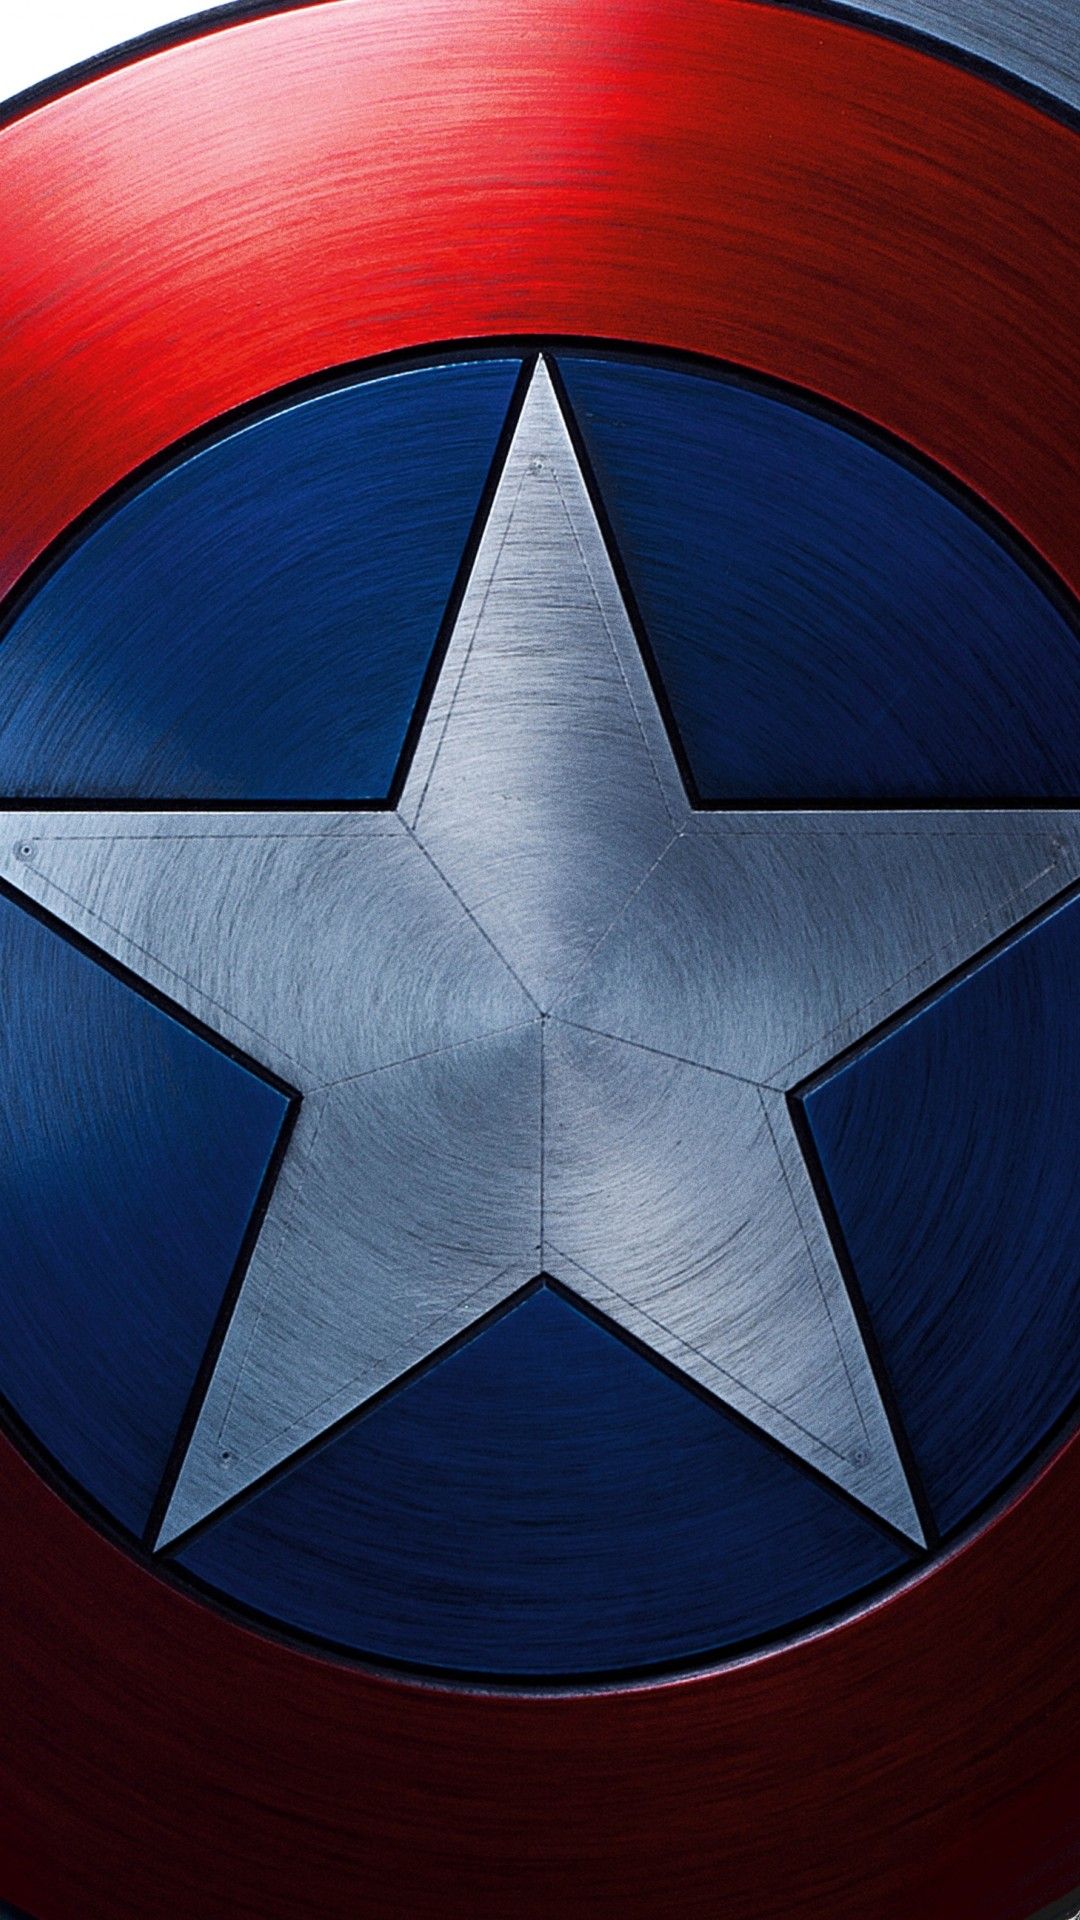 A close up of the captain america shield - Marvel